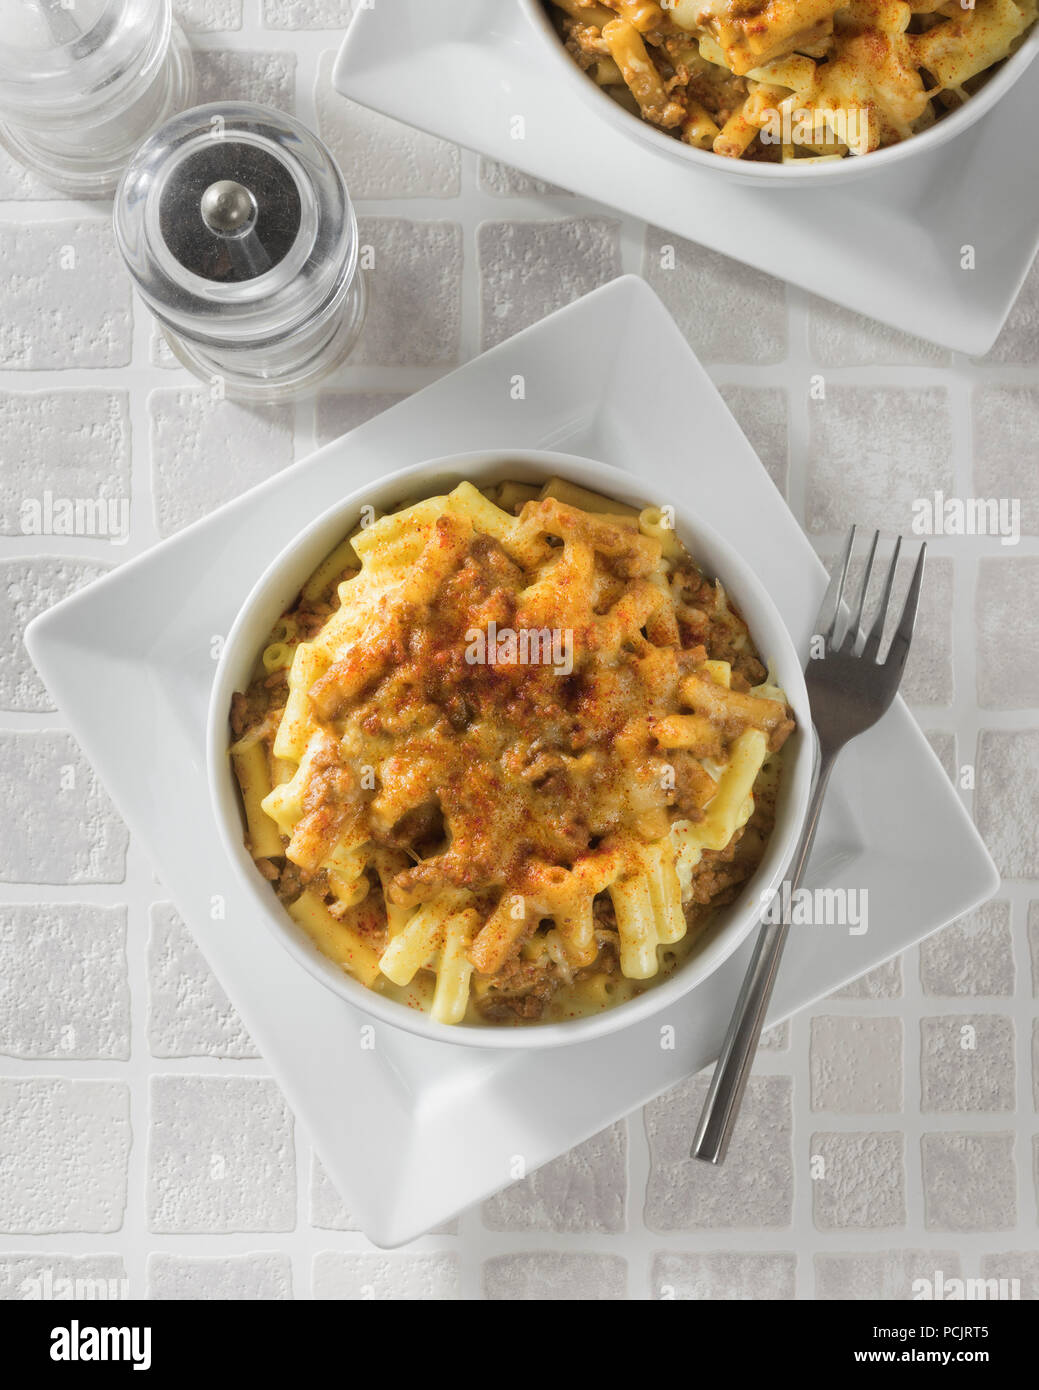 Beef mac and cheese. Minced beef and macaroni cheese. Stock Photo